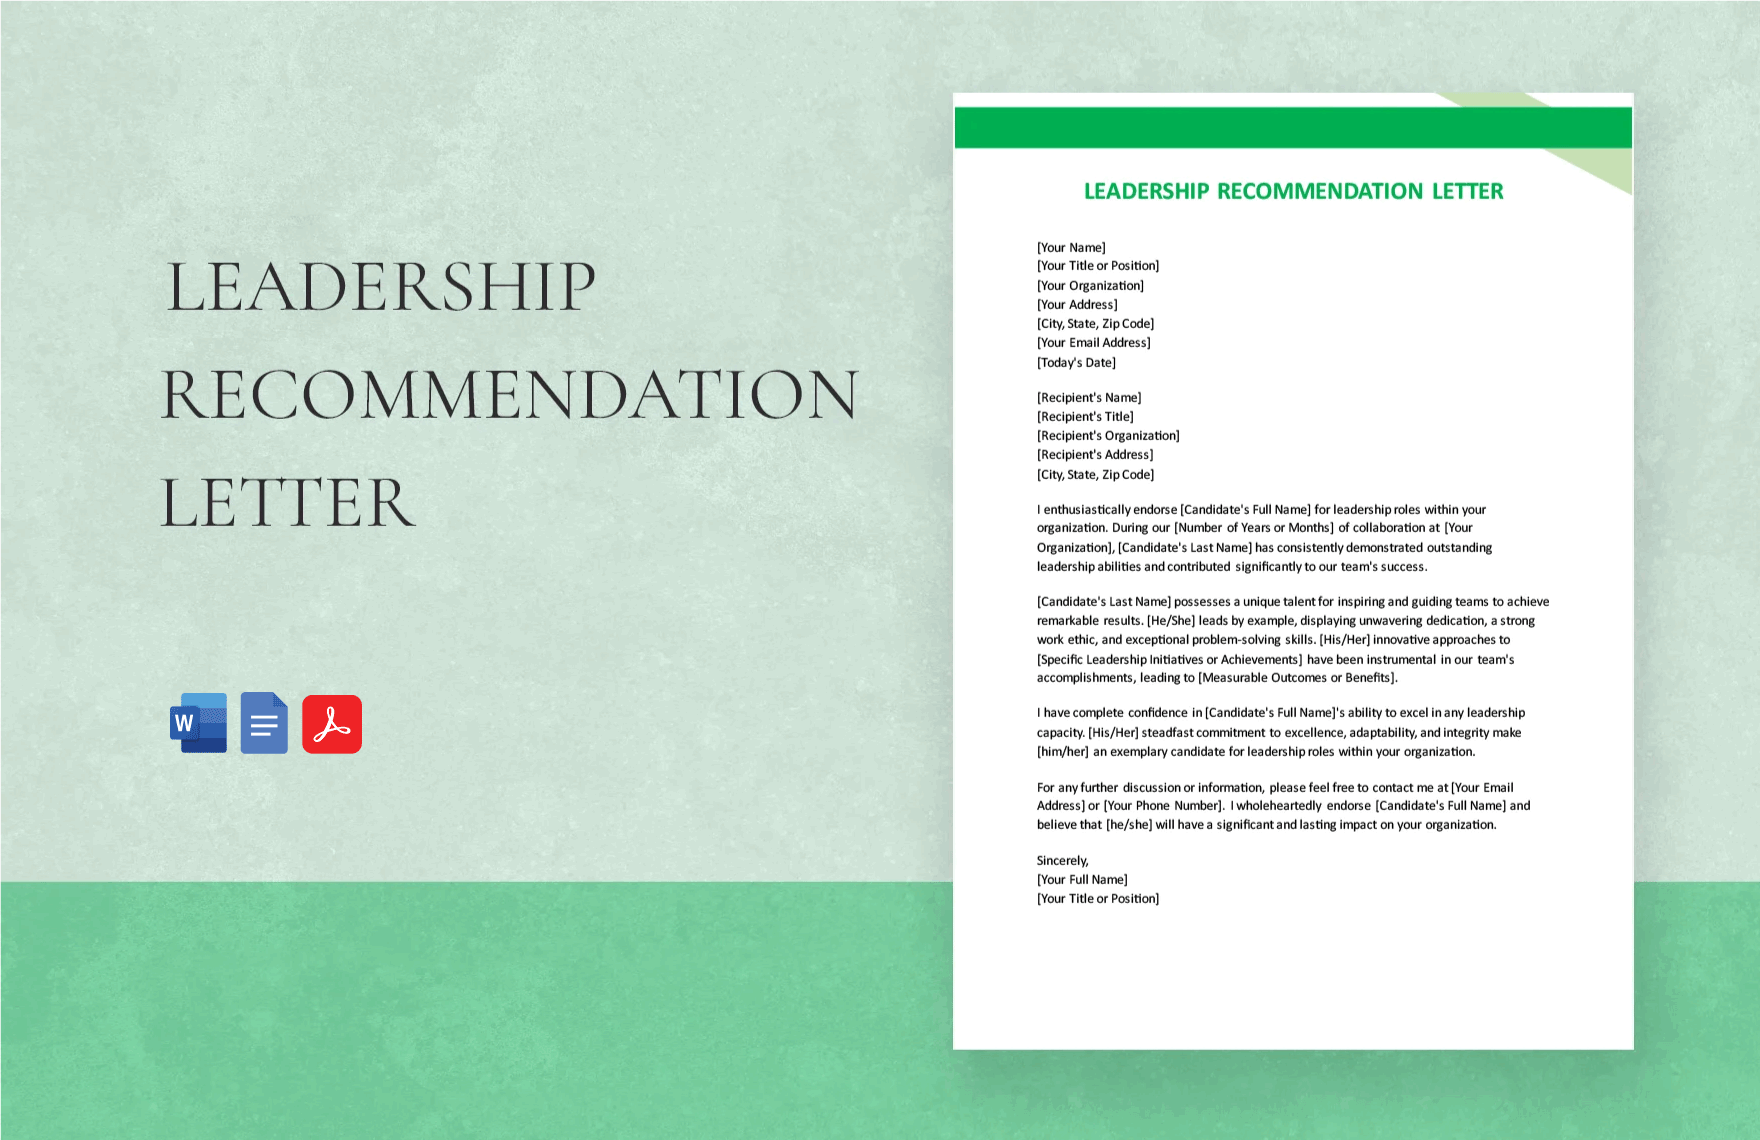 Leadership Recommendation Letter in Word, Google Docs, PDF